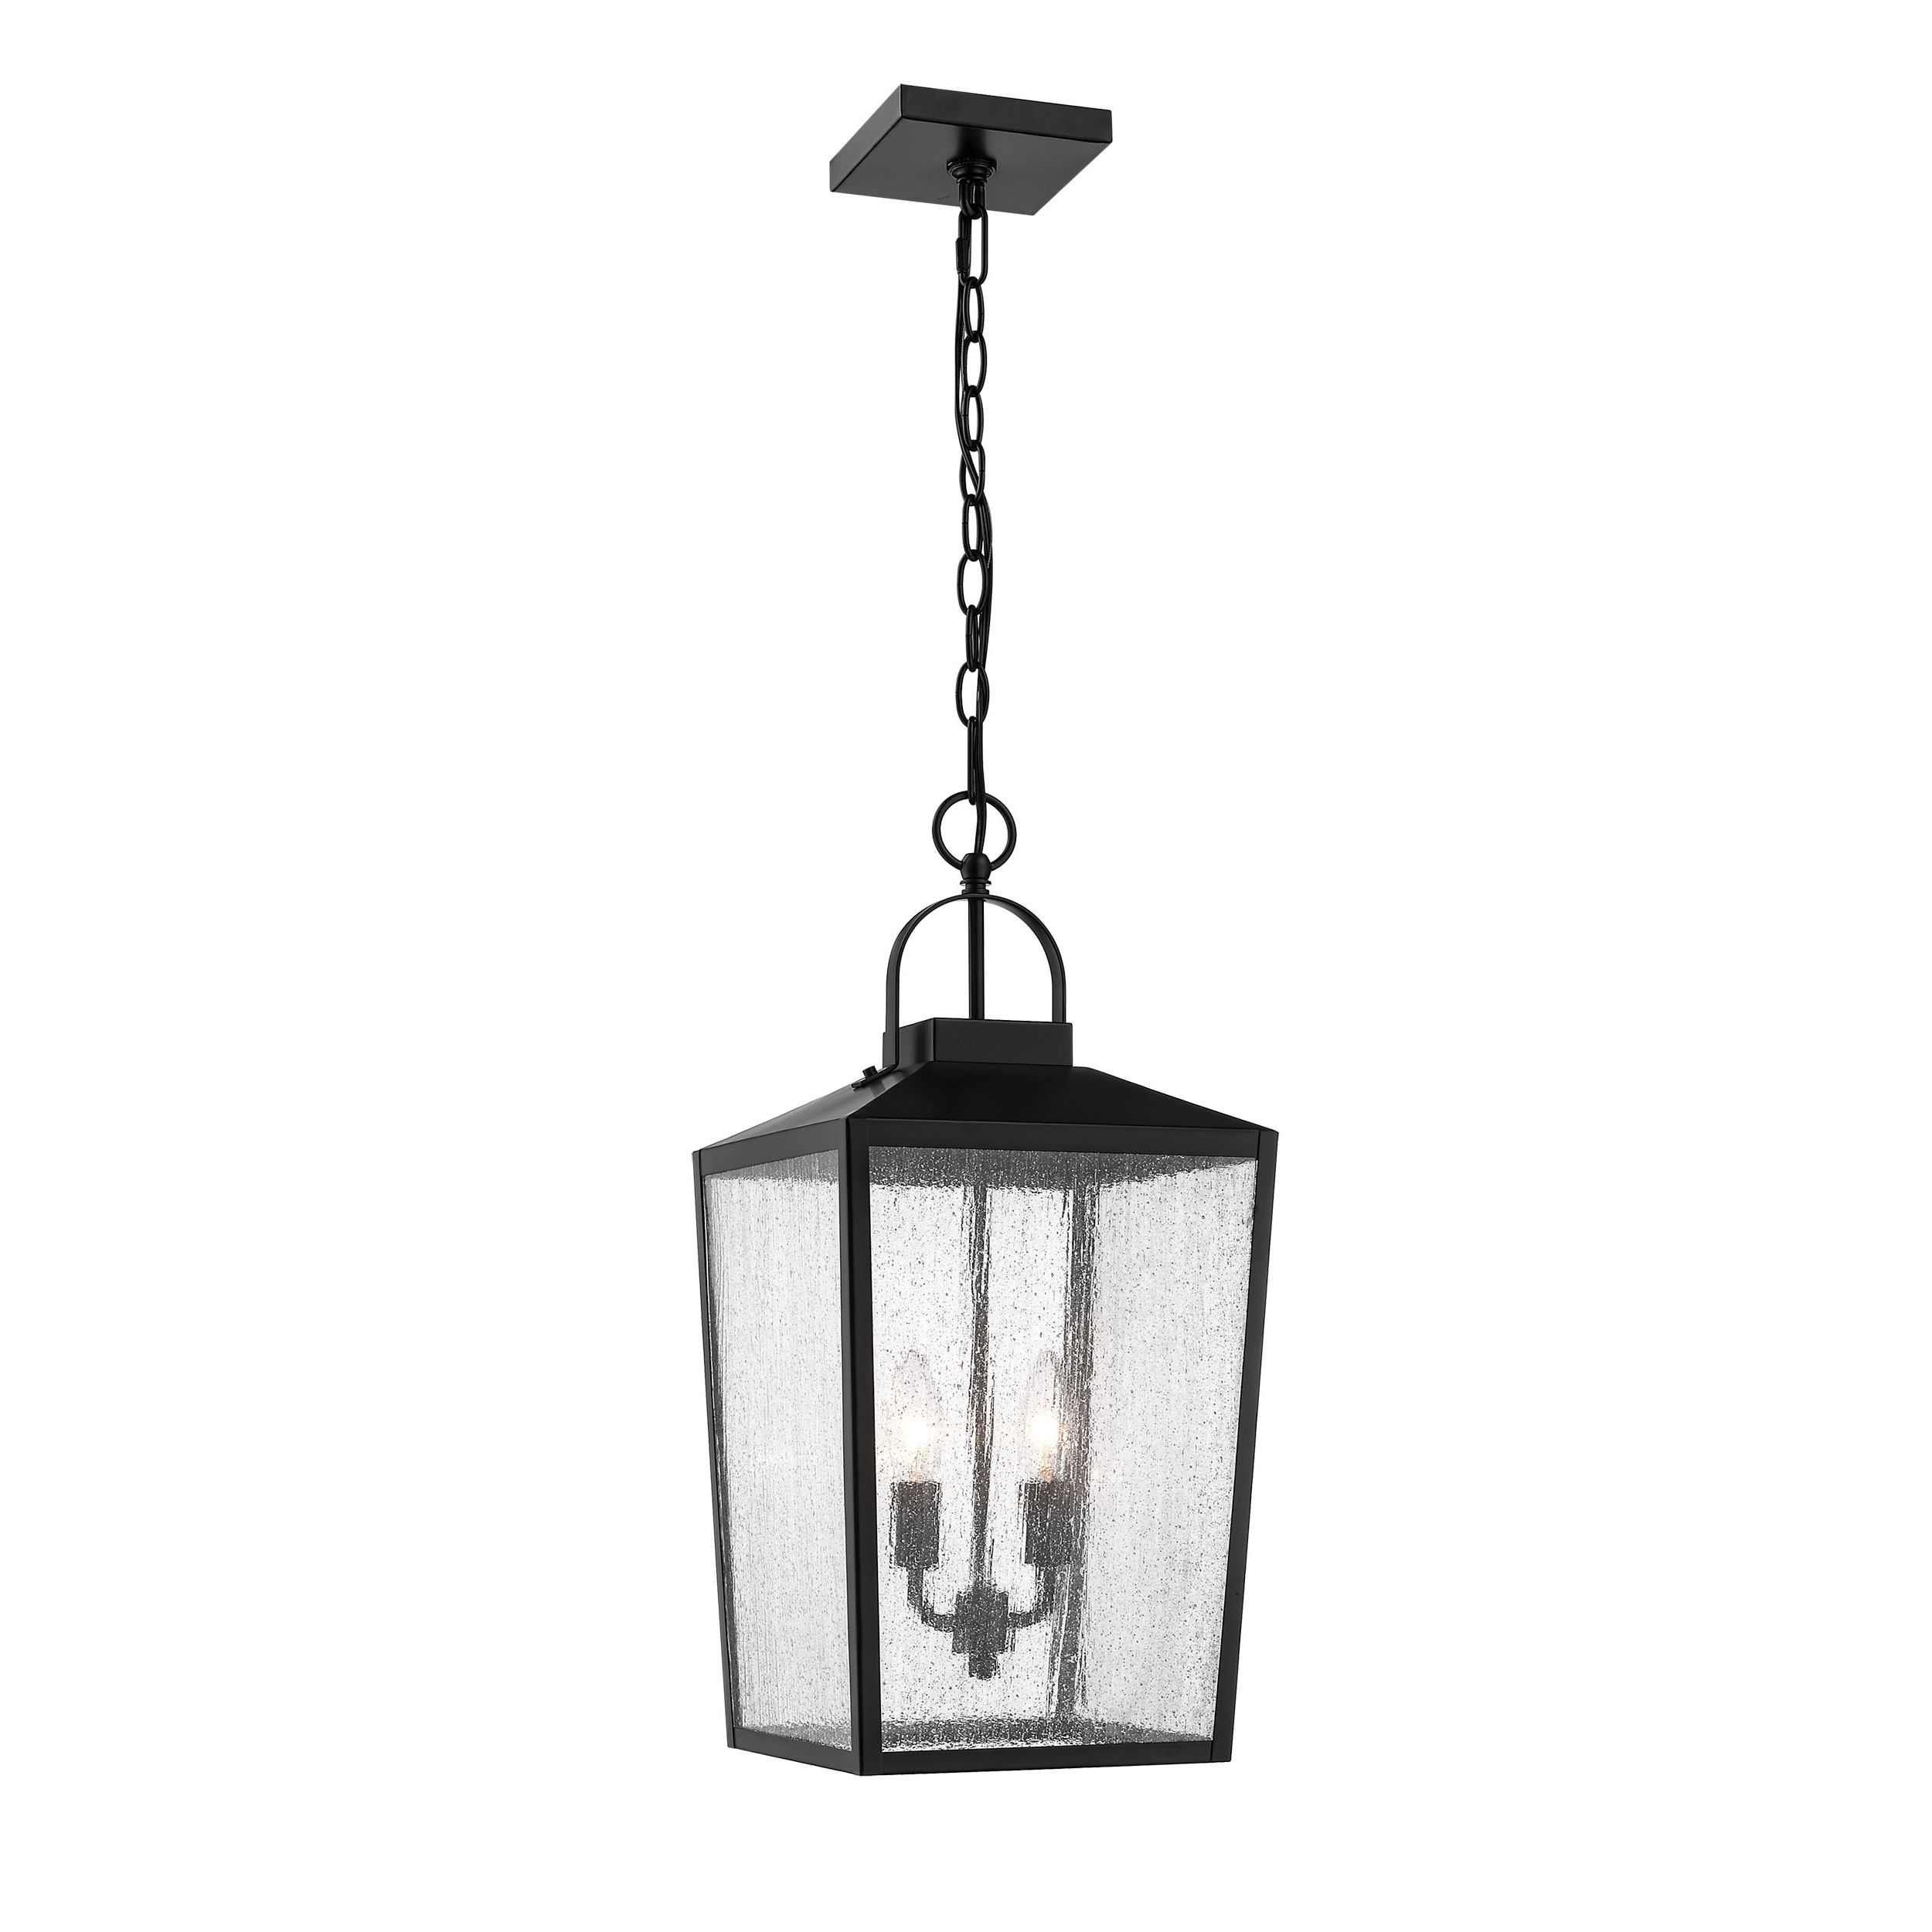 Best And Newest Millennium Lighting Devens 2 Light Powder Coat Black Transitional Seeded  Glass Lantern Outdoor Pendant Light In The Pendant Lighting Department At  Lowes Intended For White Powder Coat Lantern Chandeliers (View 4 of 15)